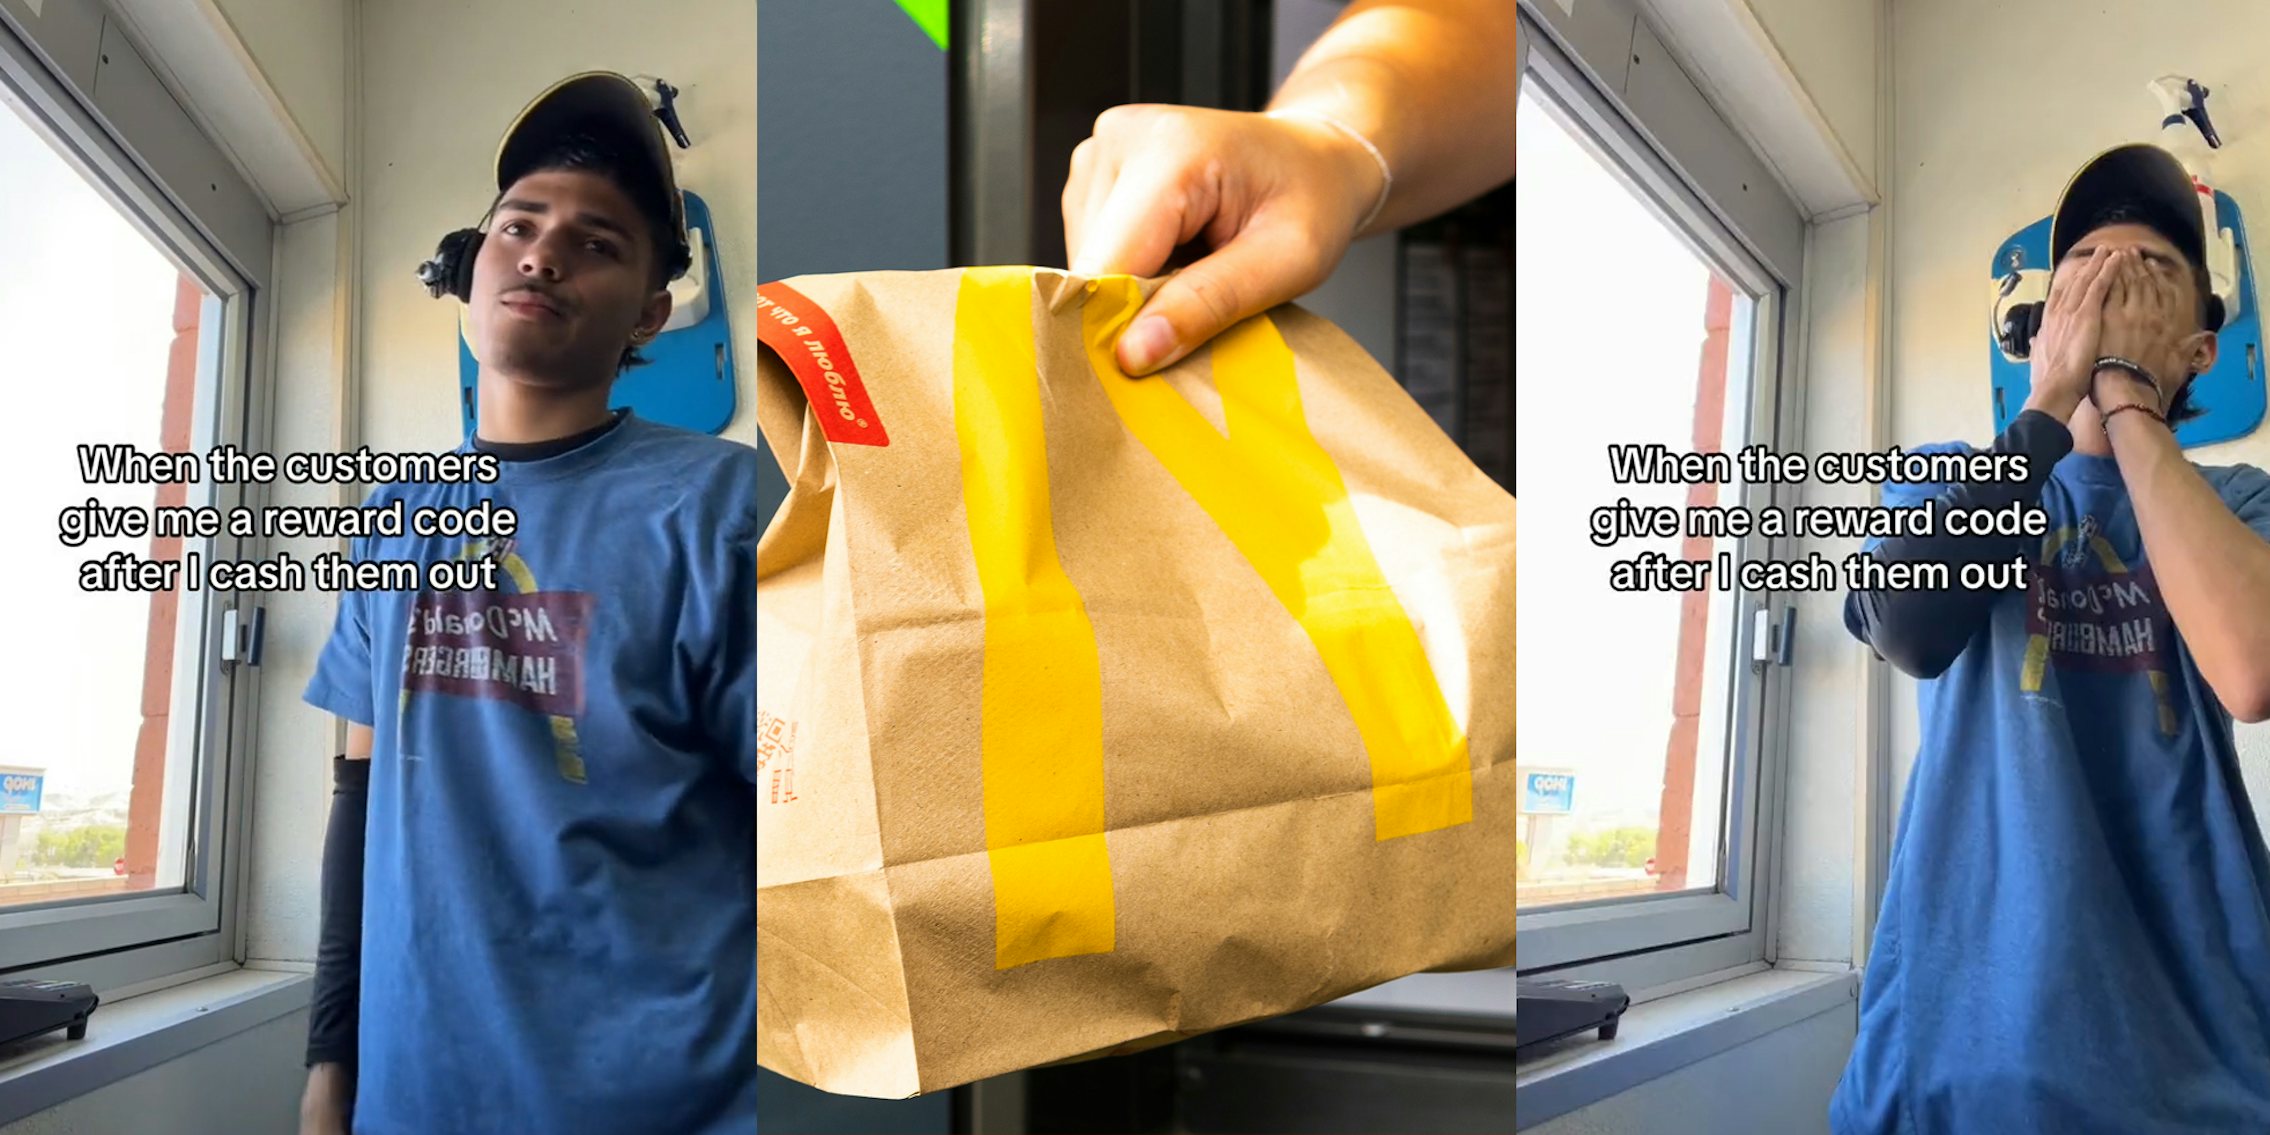 McDonald's worker with caption 'When the customers give me a reward code after I cash them out' (l) McDonald's drive thru worker holding bag of food (c) McDonald's worker with caption 'When the customers give me a reward code after I cash them out' (r)